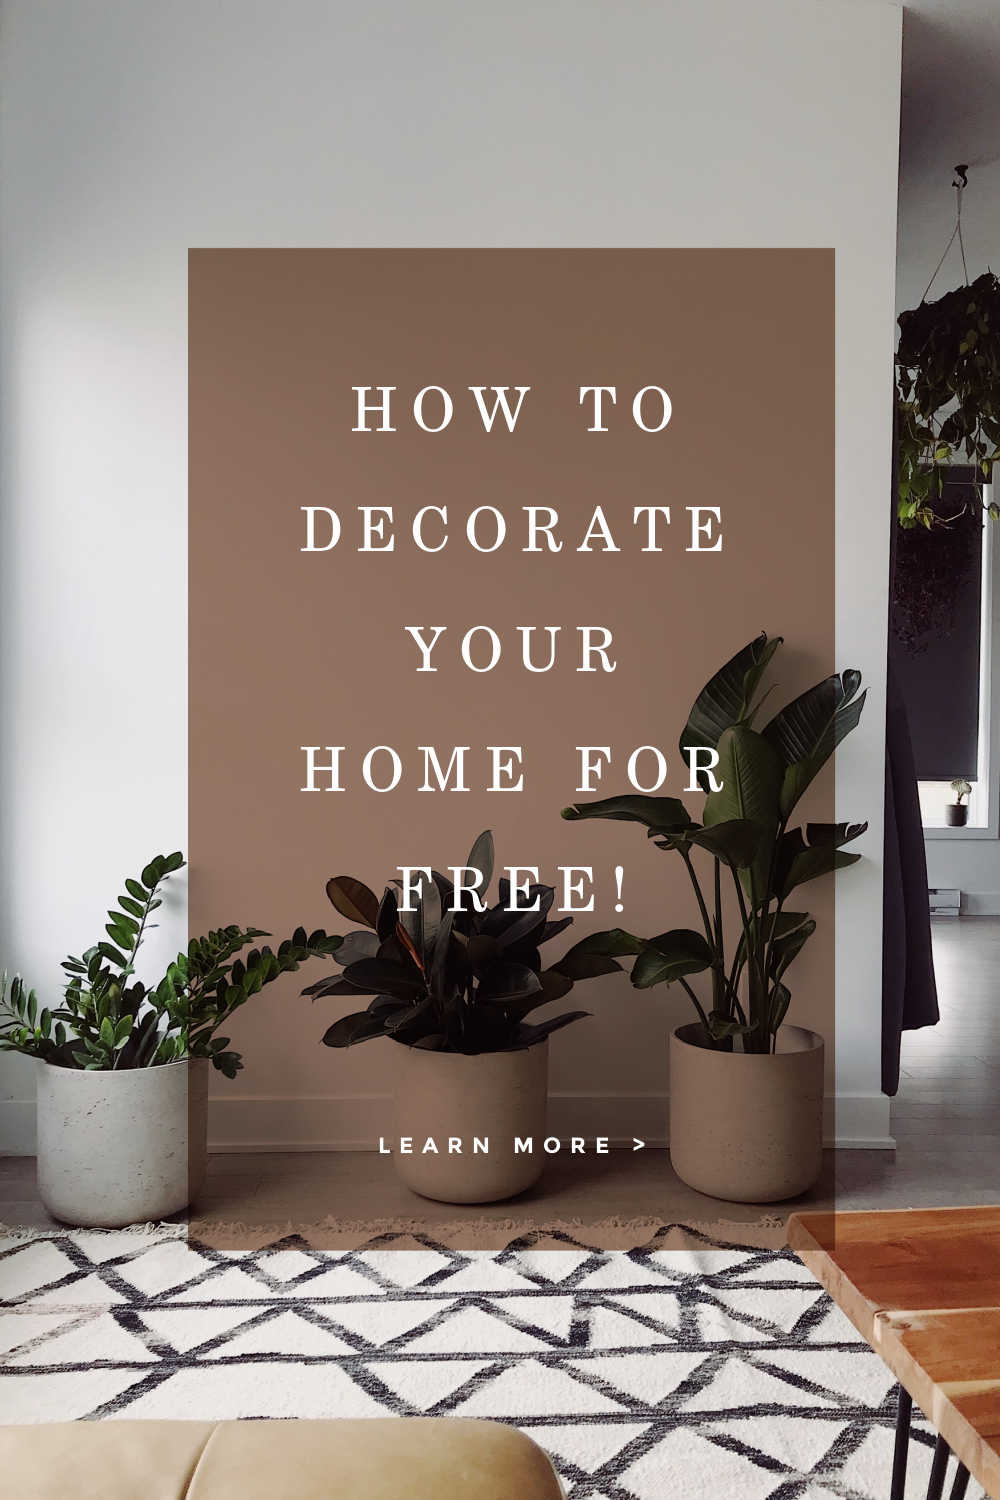 How To Decorate Your Home for Free